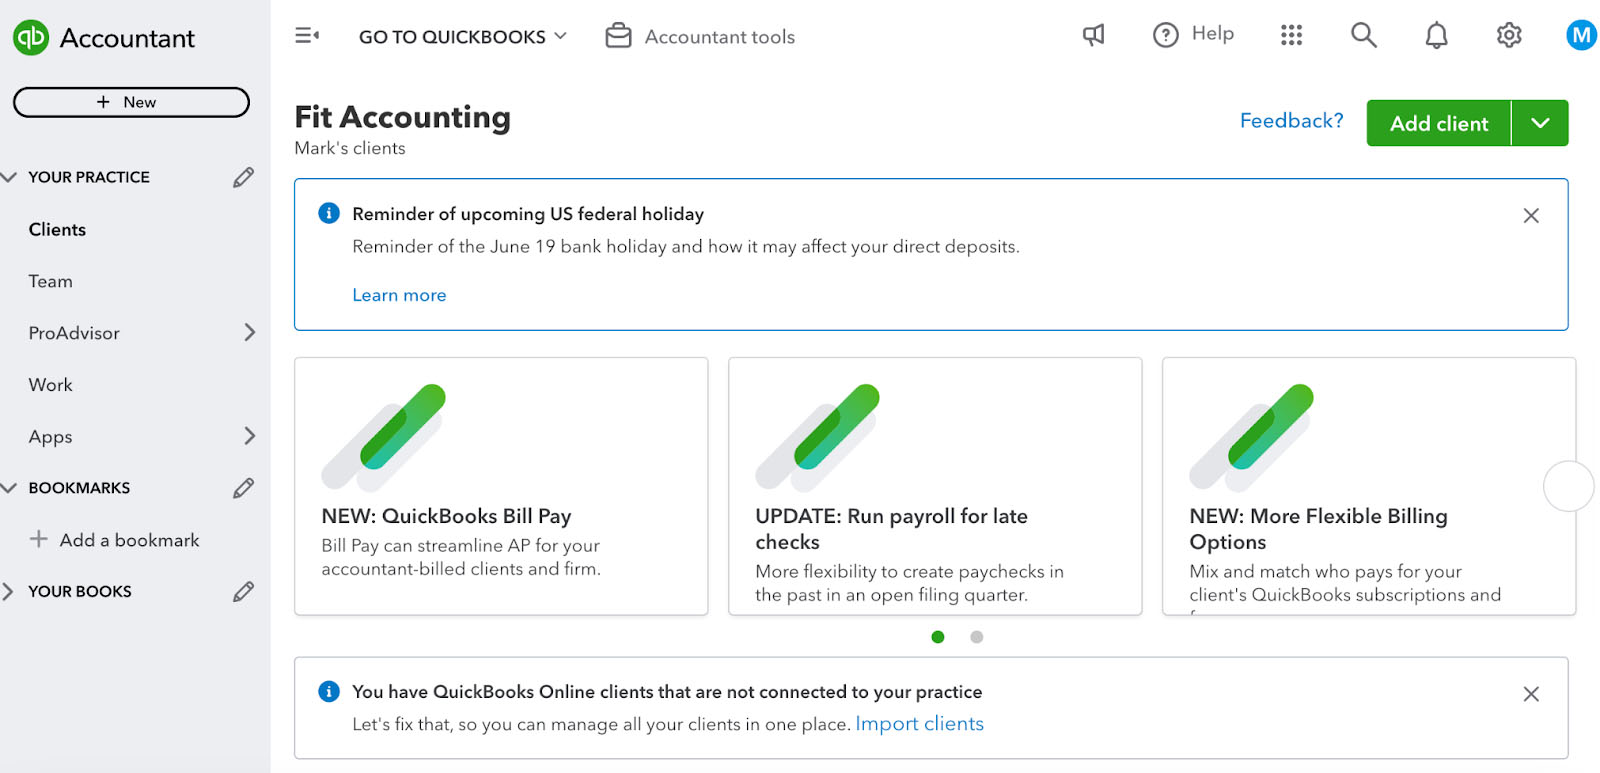 QuickBooks Online Accountant dashboard showing sections like the left-side menu and the Add client button.